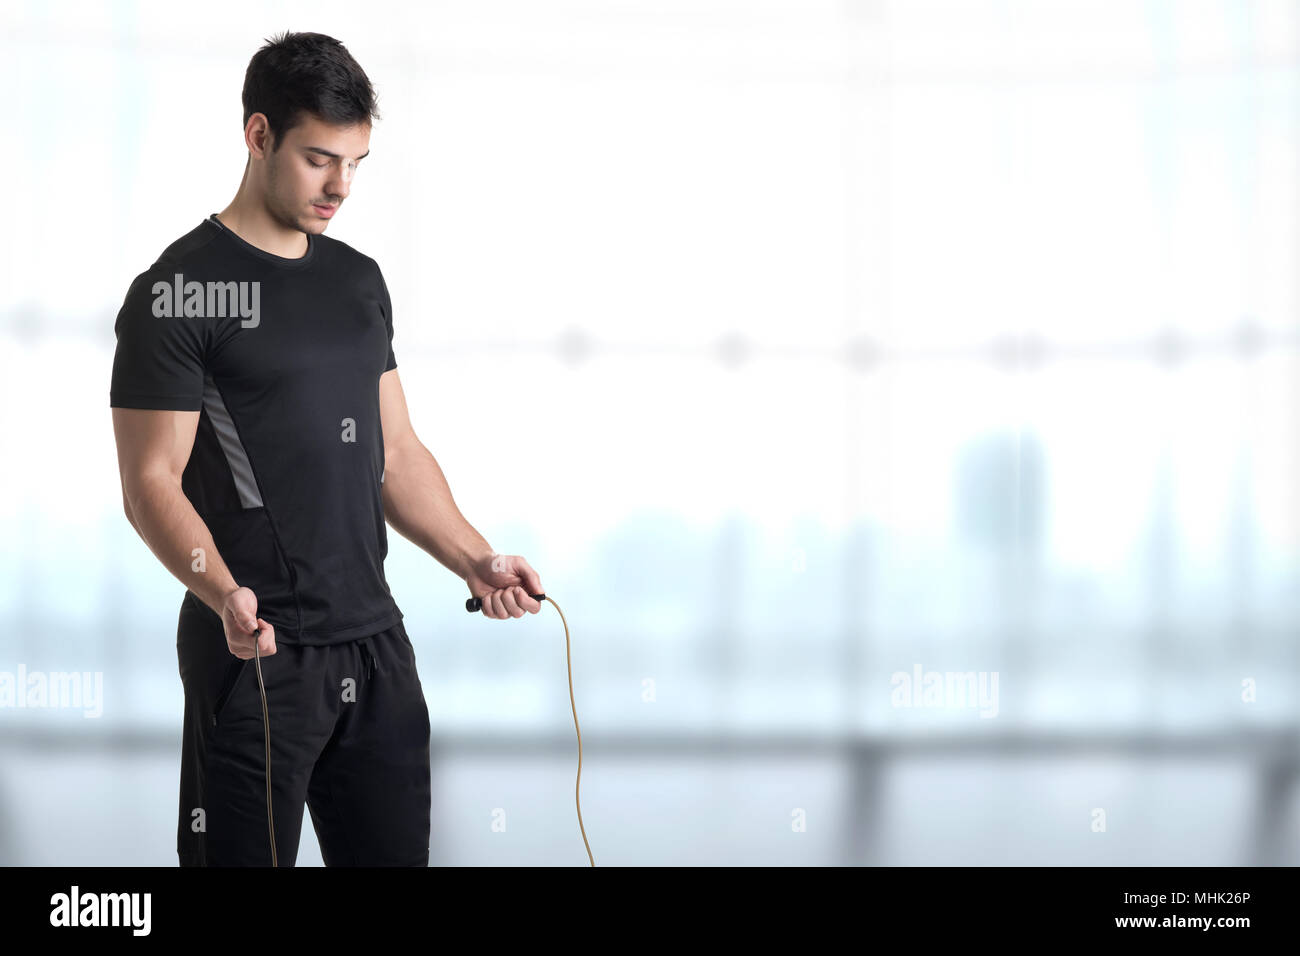 Fit athlete jumping rope, in a gym Stock Photo